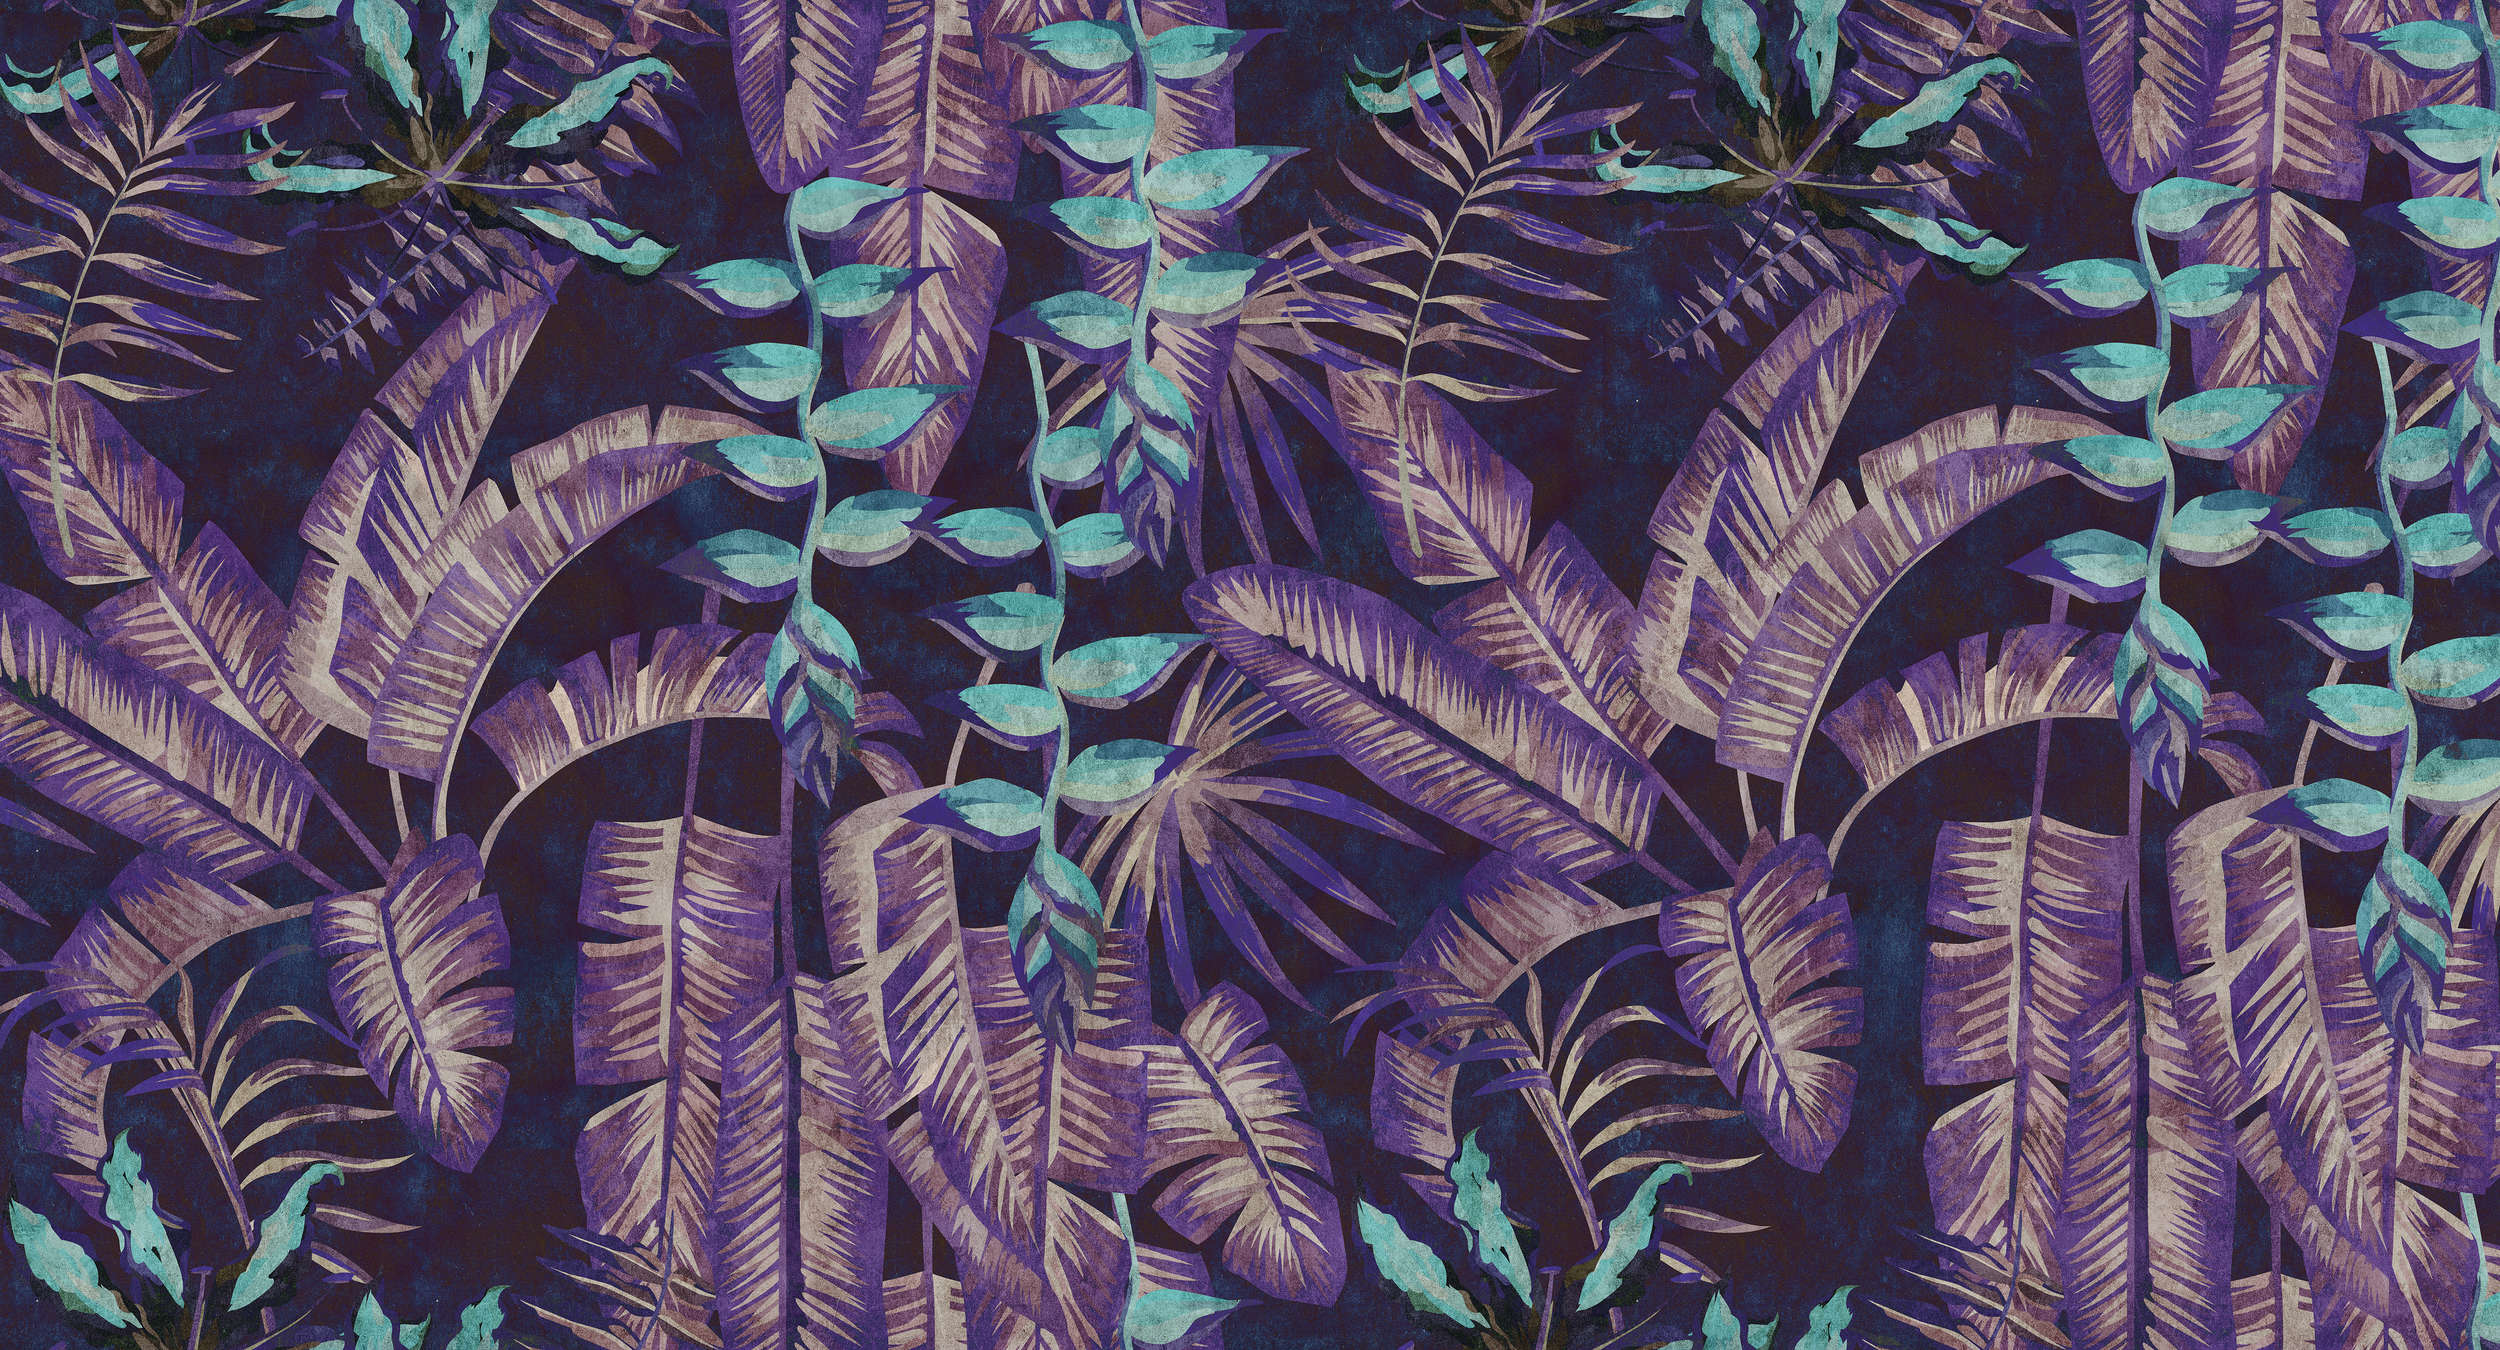             Tropicana 6 - digital print wallpaper in blotting paper texture with jungle motif - turquoise, violet | premium smooth non-woven
        